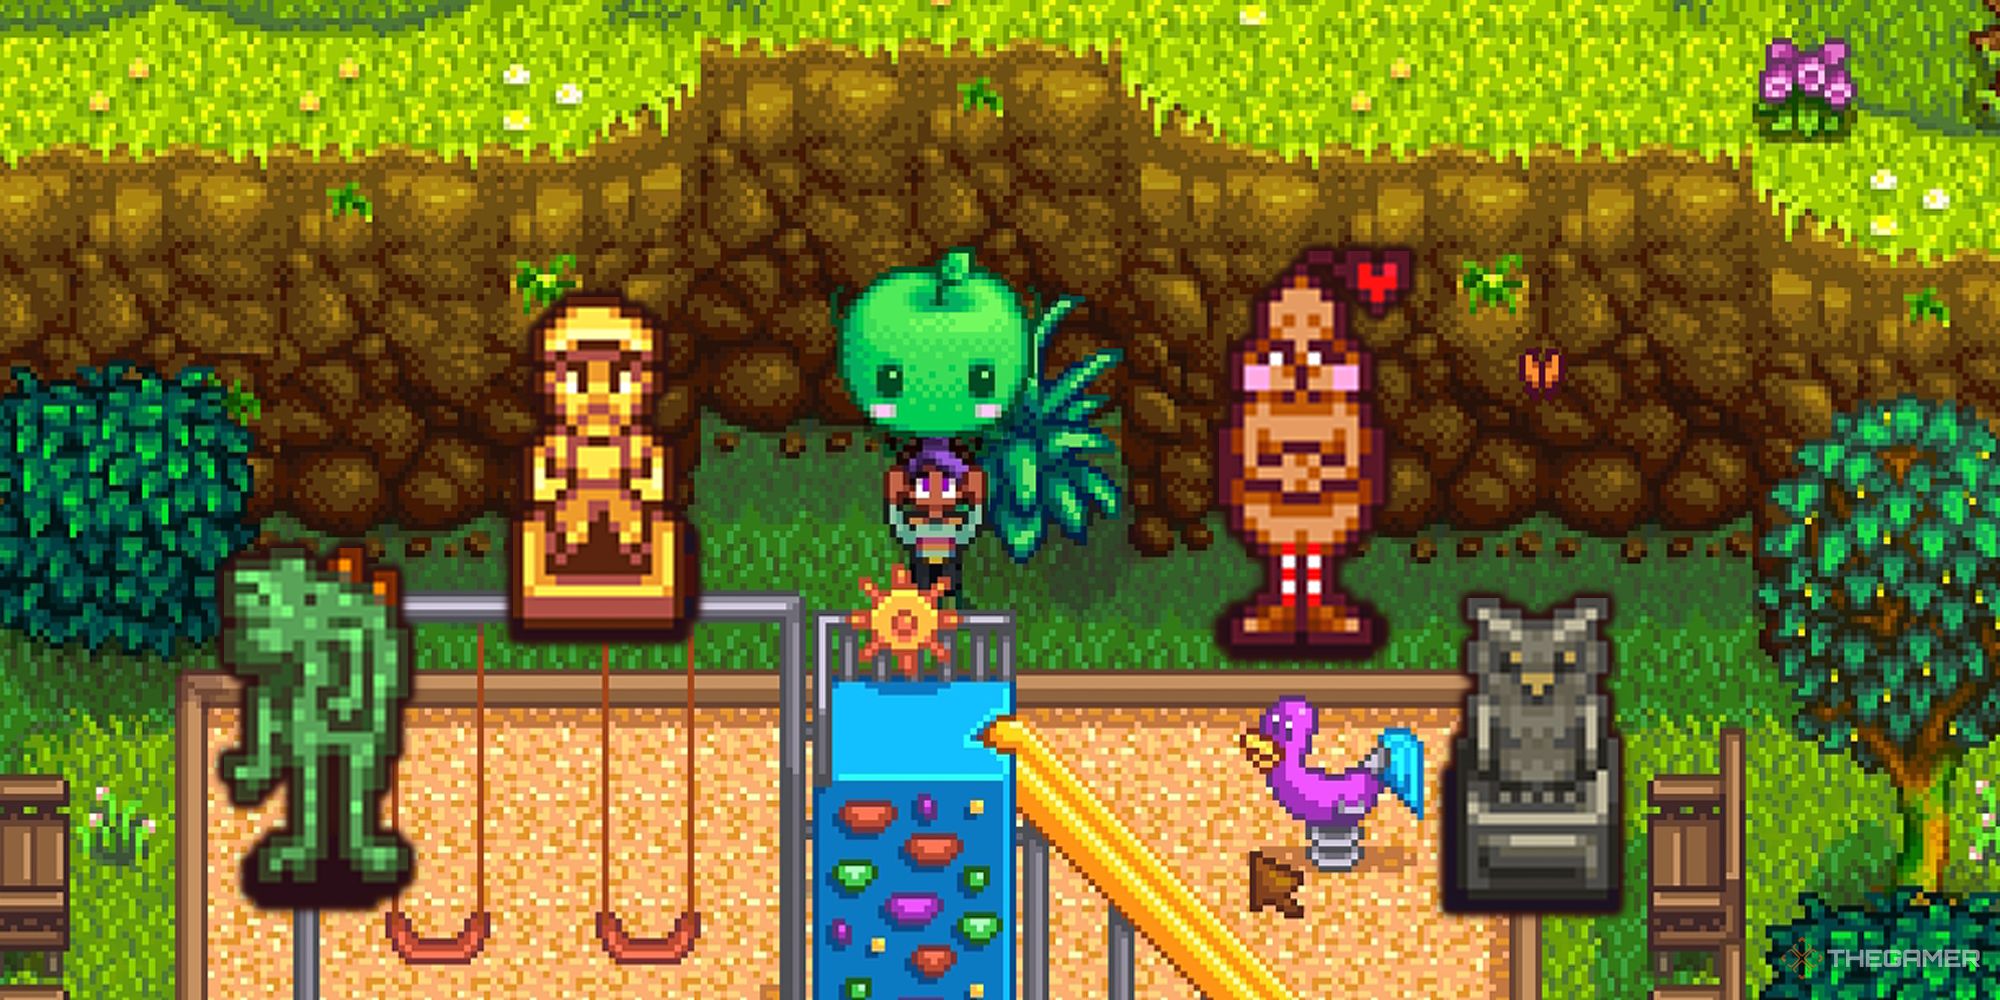 How To Get All The Secret Statues In Stardew Valley